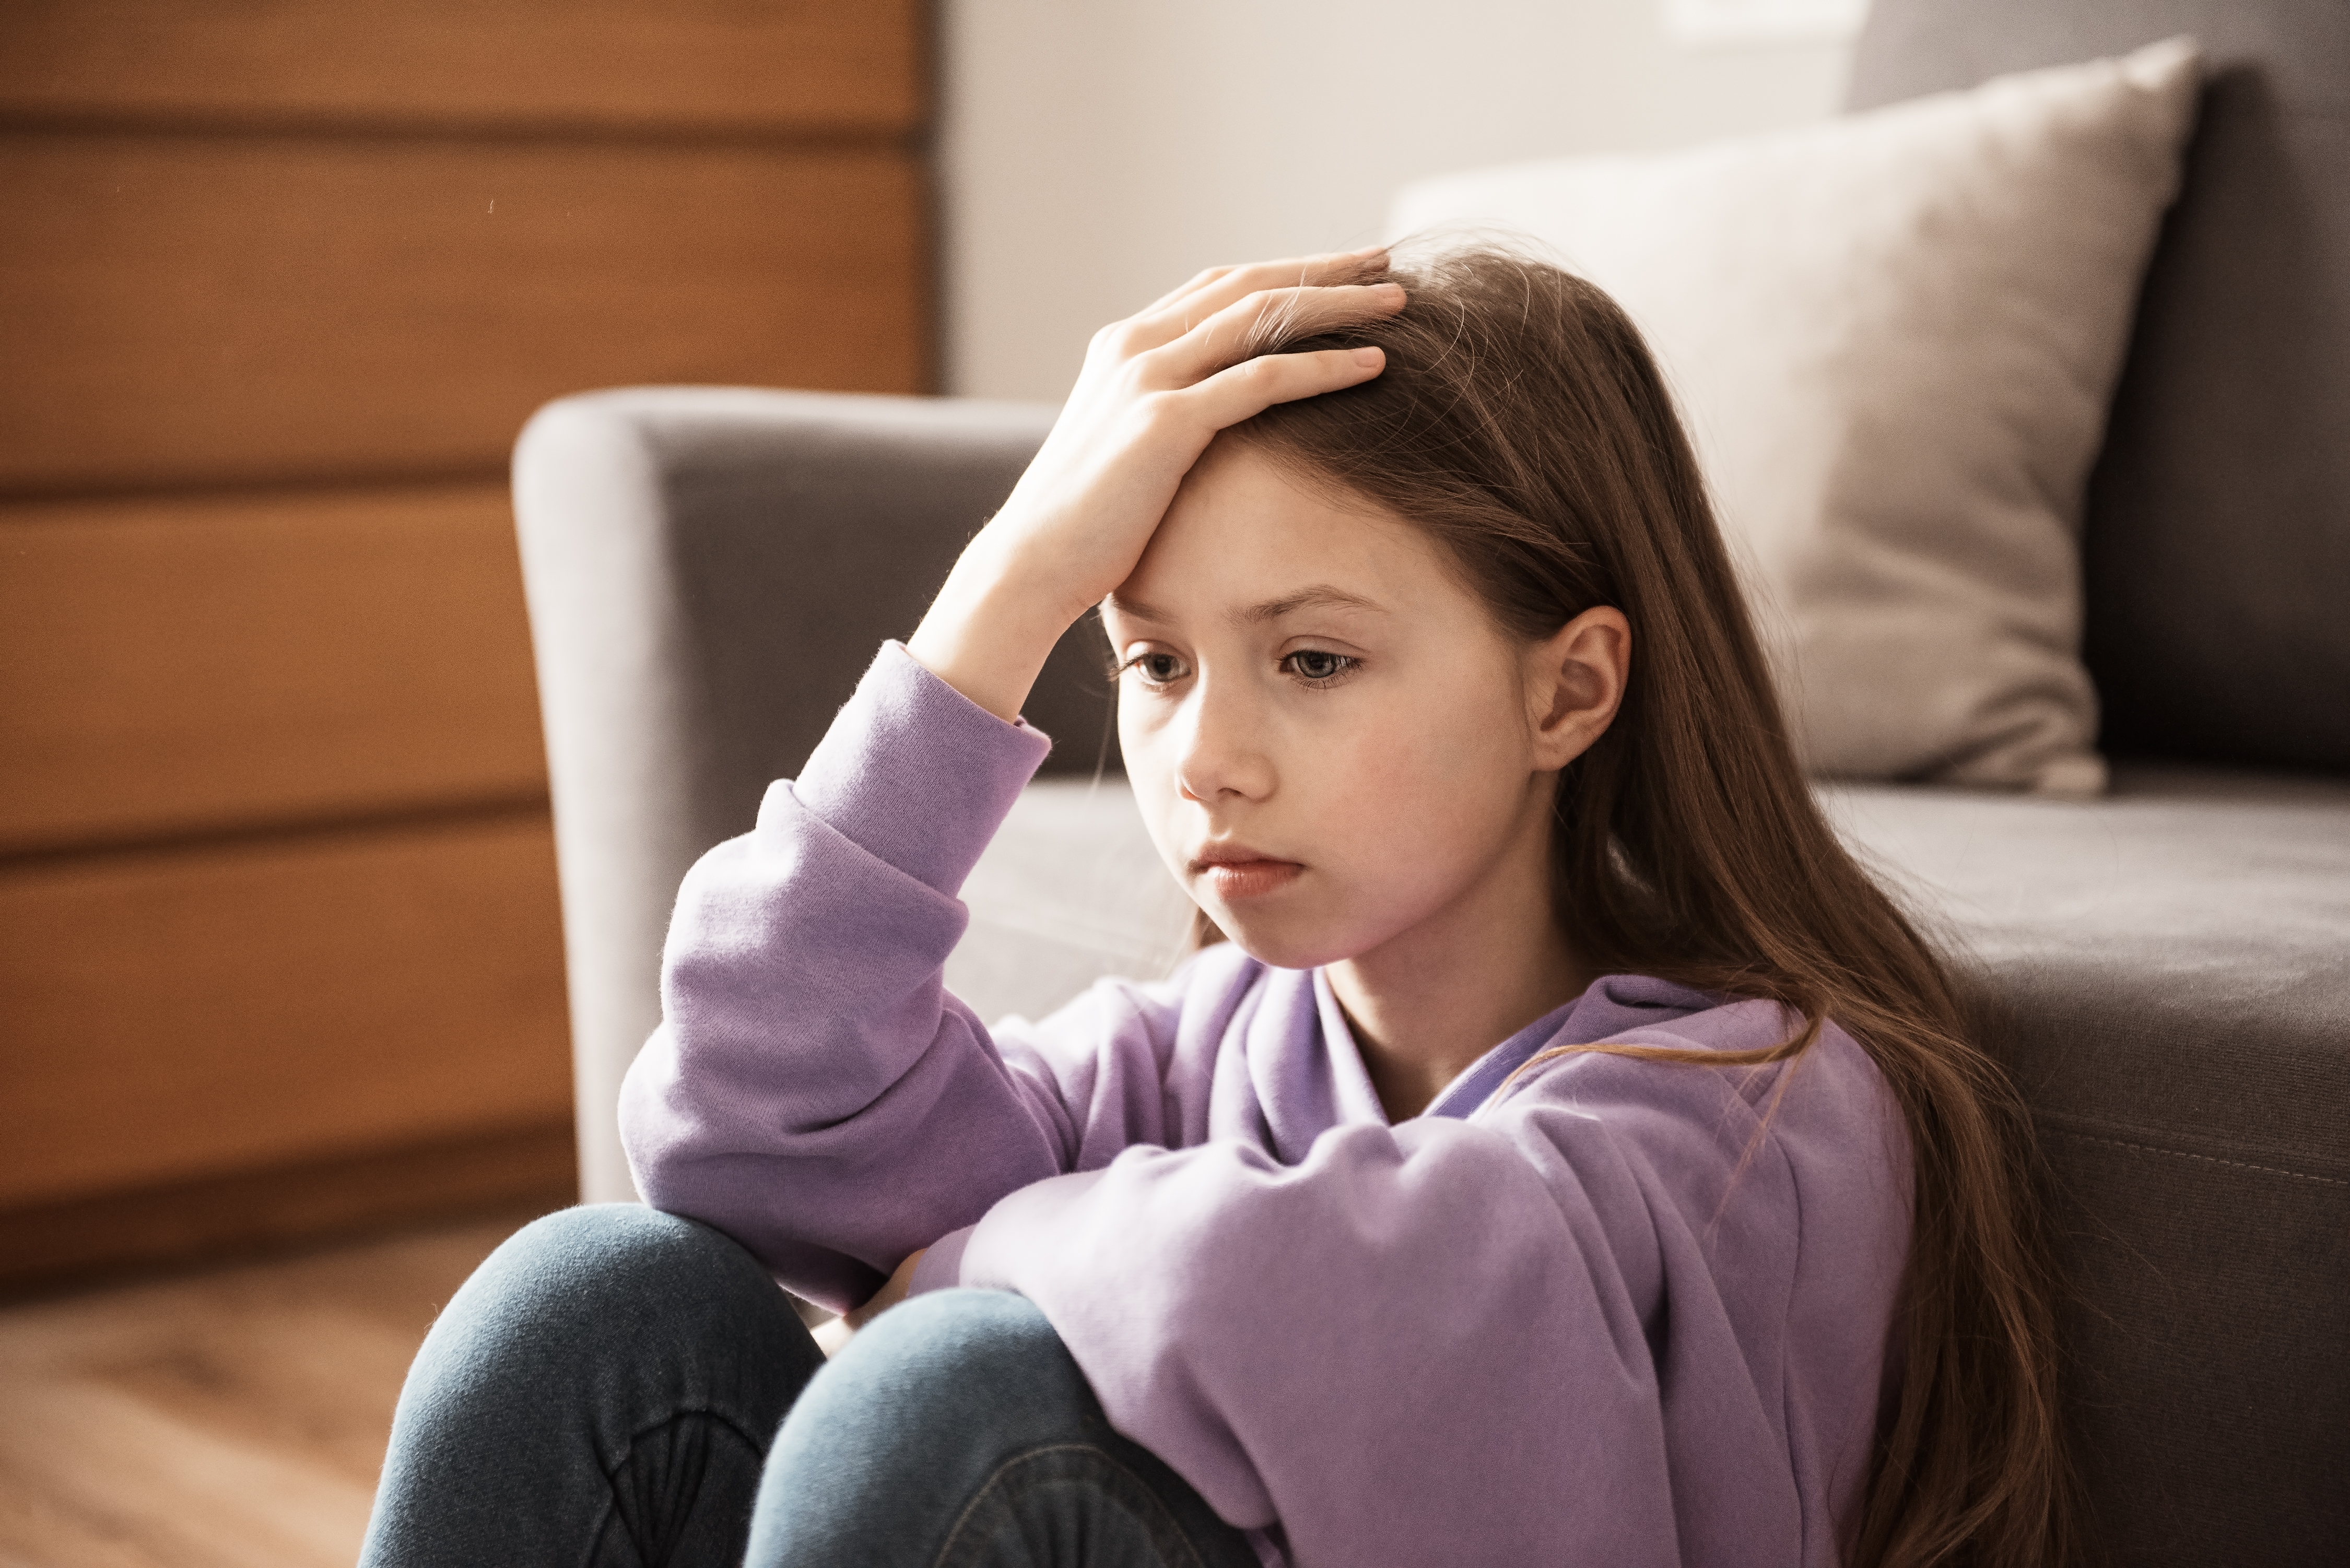 A depressed teenage girl is pictured sitting indoors | Source: Shutterstock